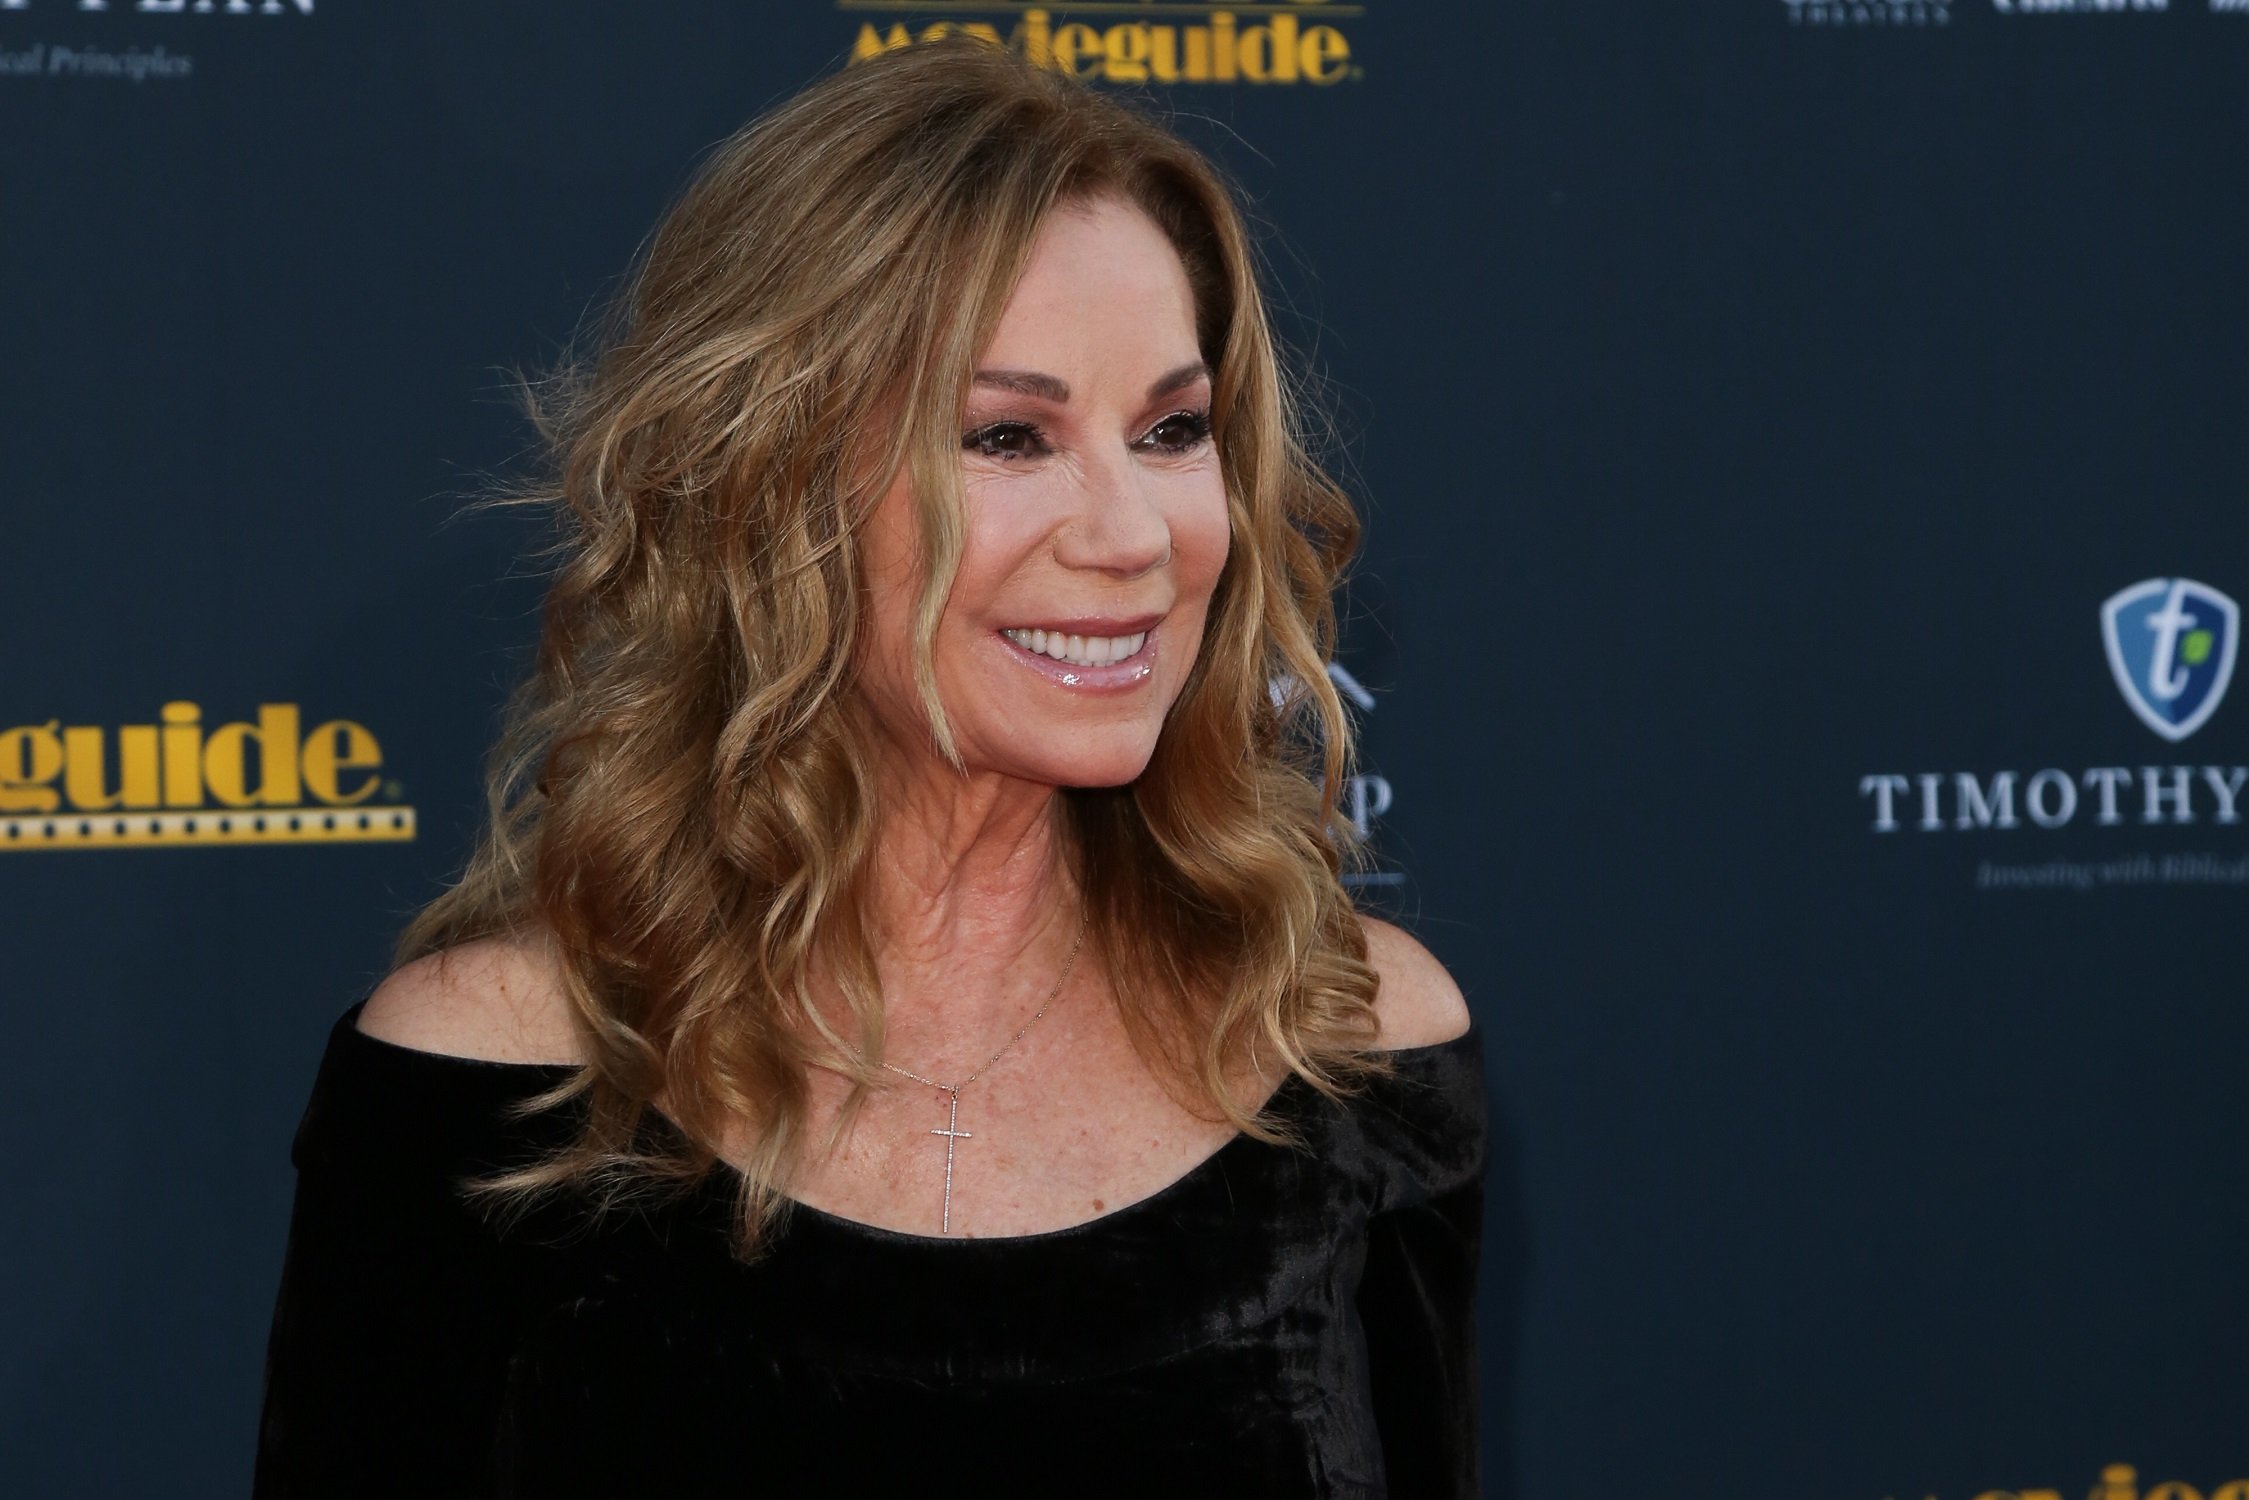 Kathie Lee Gifford attends the 28th Annual Movieguide Awards Gala at Avalon Theater